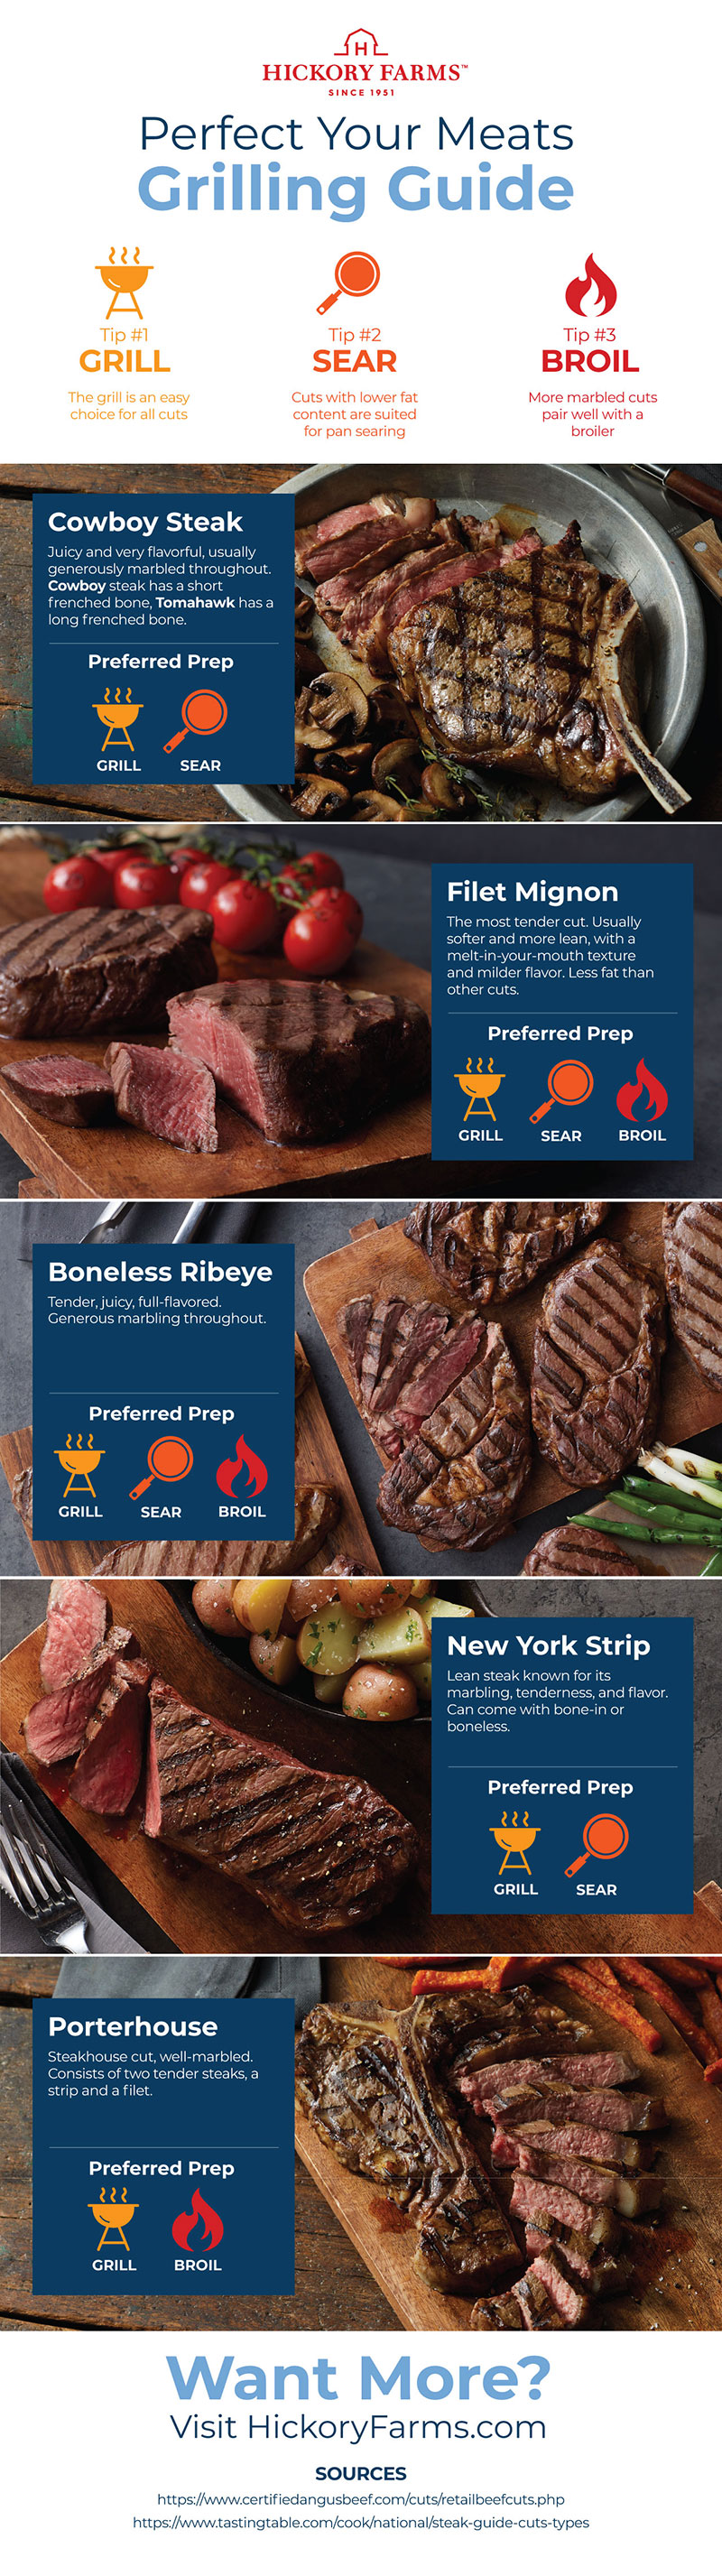 Grilling Guide for High-Quality Cut Steaks | Hickory Farms